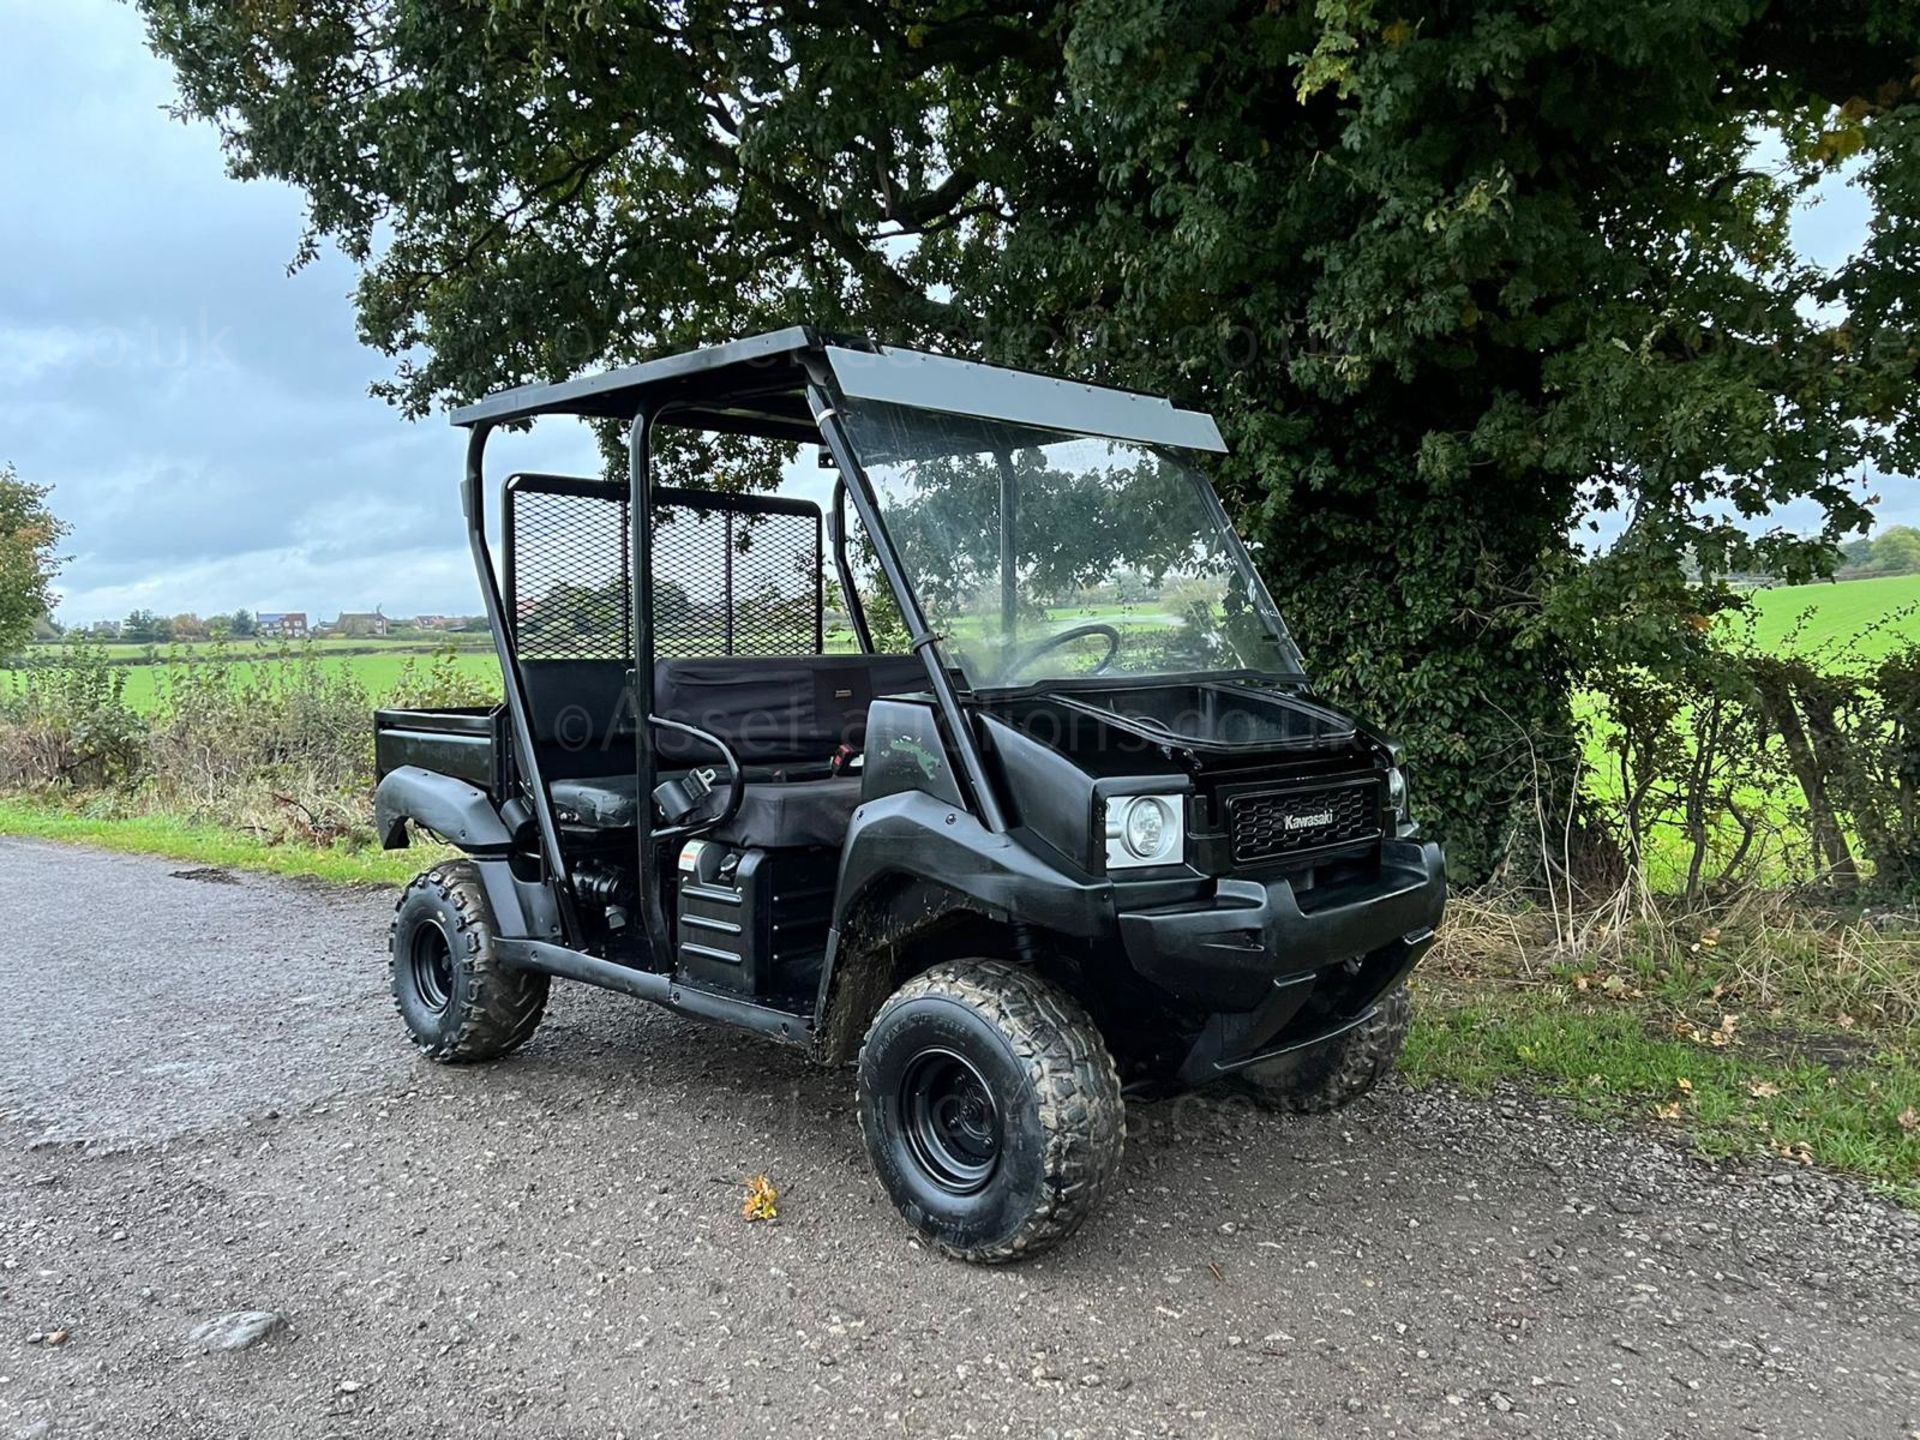 2011 KAWASAKI MULE 4010 4WD DIESEL BUGGI, RUNS AND DRIVES, SHOWING A LOW 2038 HOURS *PLUS VAT* - Image 2 of 19